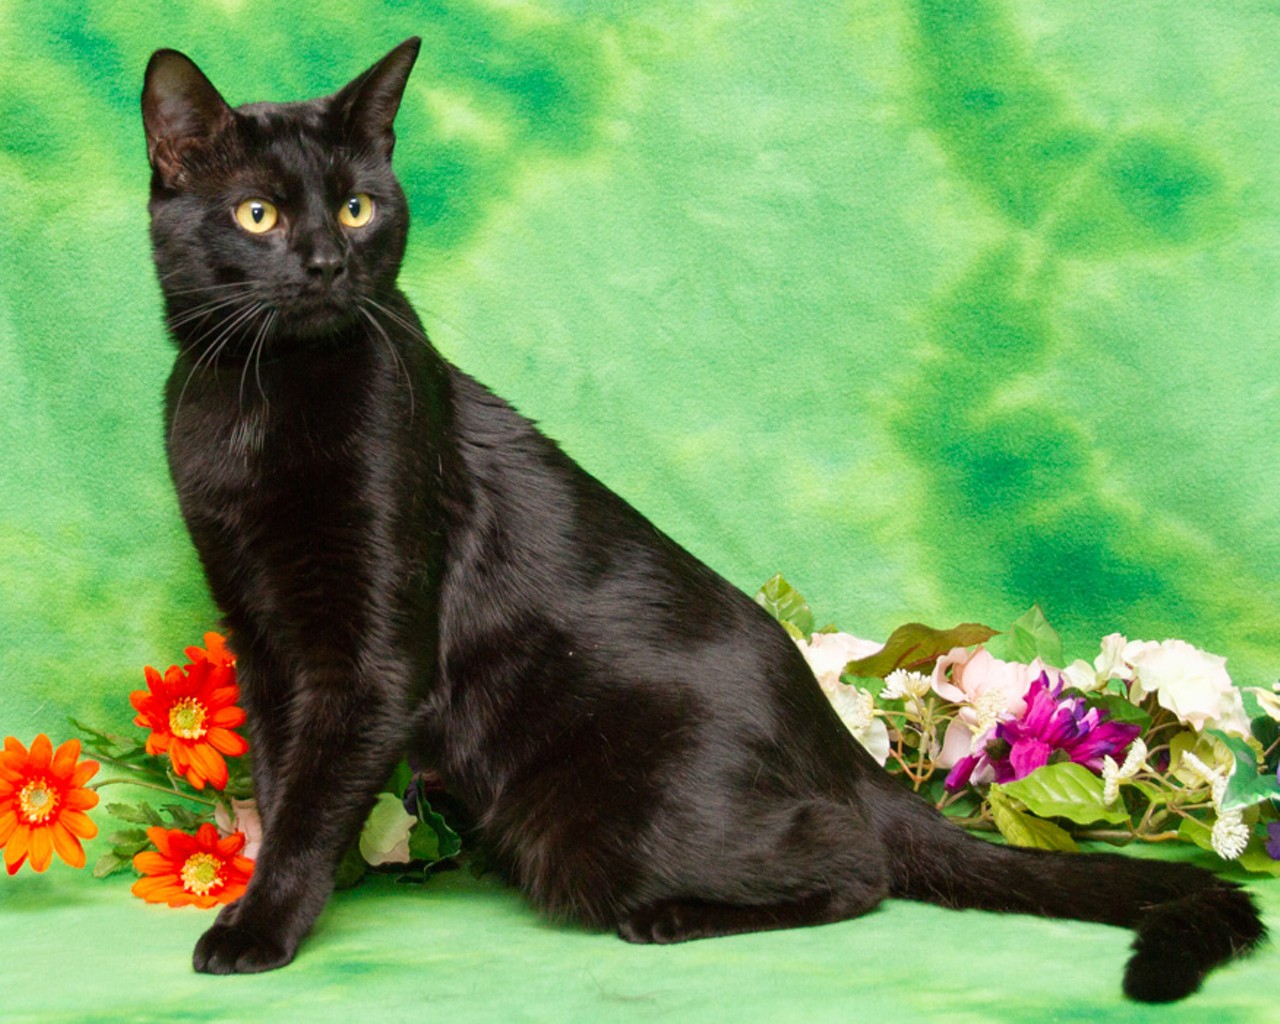 NAME: Bolt
GENDER: Male
BREED: Domestic Short Hair
AGE: 3 years
WEIGHT: 12 pounds
SPECIAL CONSIDERATIONS: Bolt may prefer a home with older children.
REASON I CAME TO MHS: Homeless in Livonia
LOCATION: Premier Pet Supply of Novi
ID NUMBER: 868952